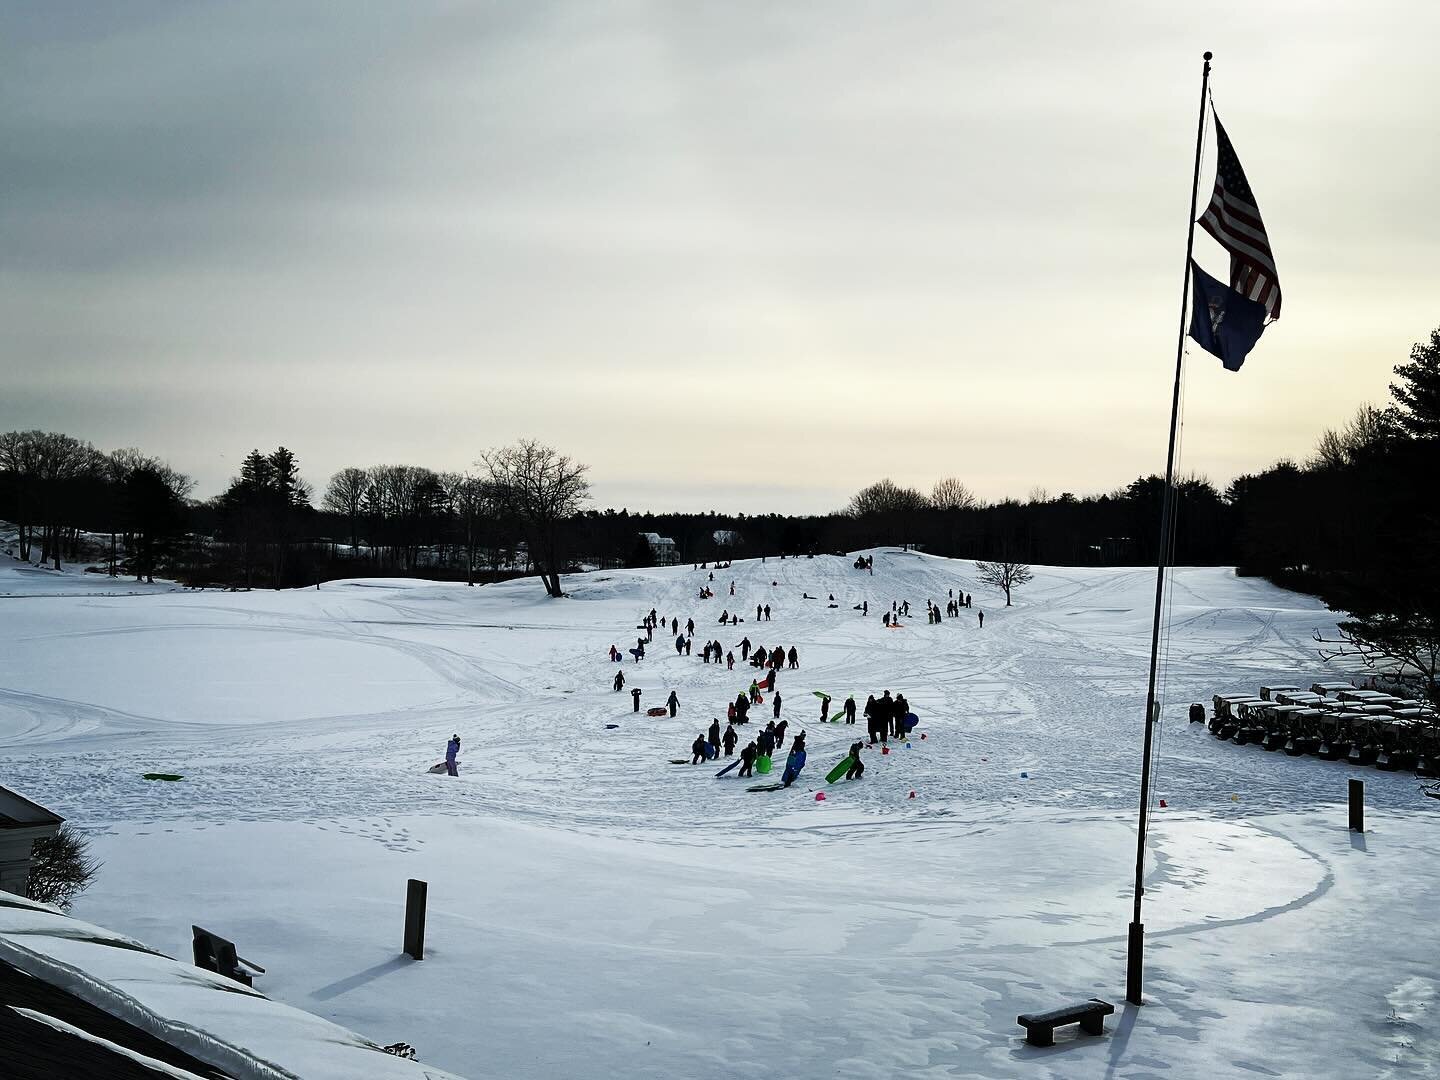 🛷🛷The littles of West Bath Elementary take over for a great day of sledding! We love and welcome it when the community utilizes this beautiful property in the winter!! 🛷🛷 #shipcity #bathmaine #winterwonderland